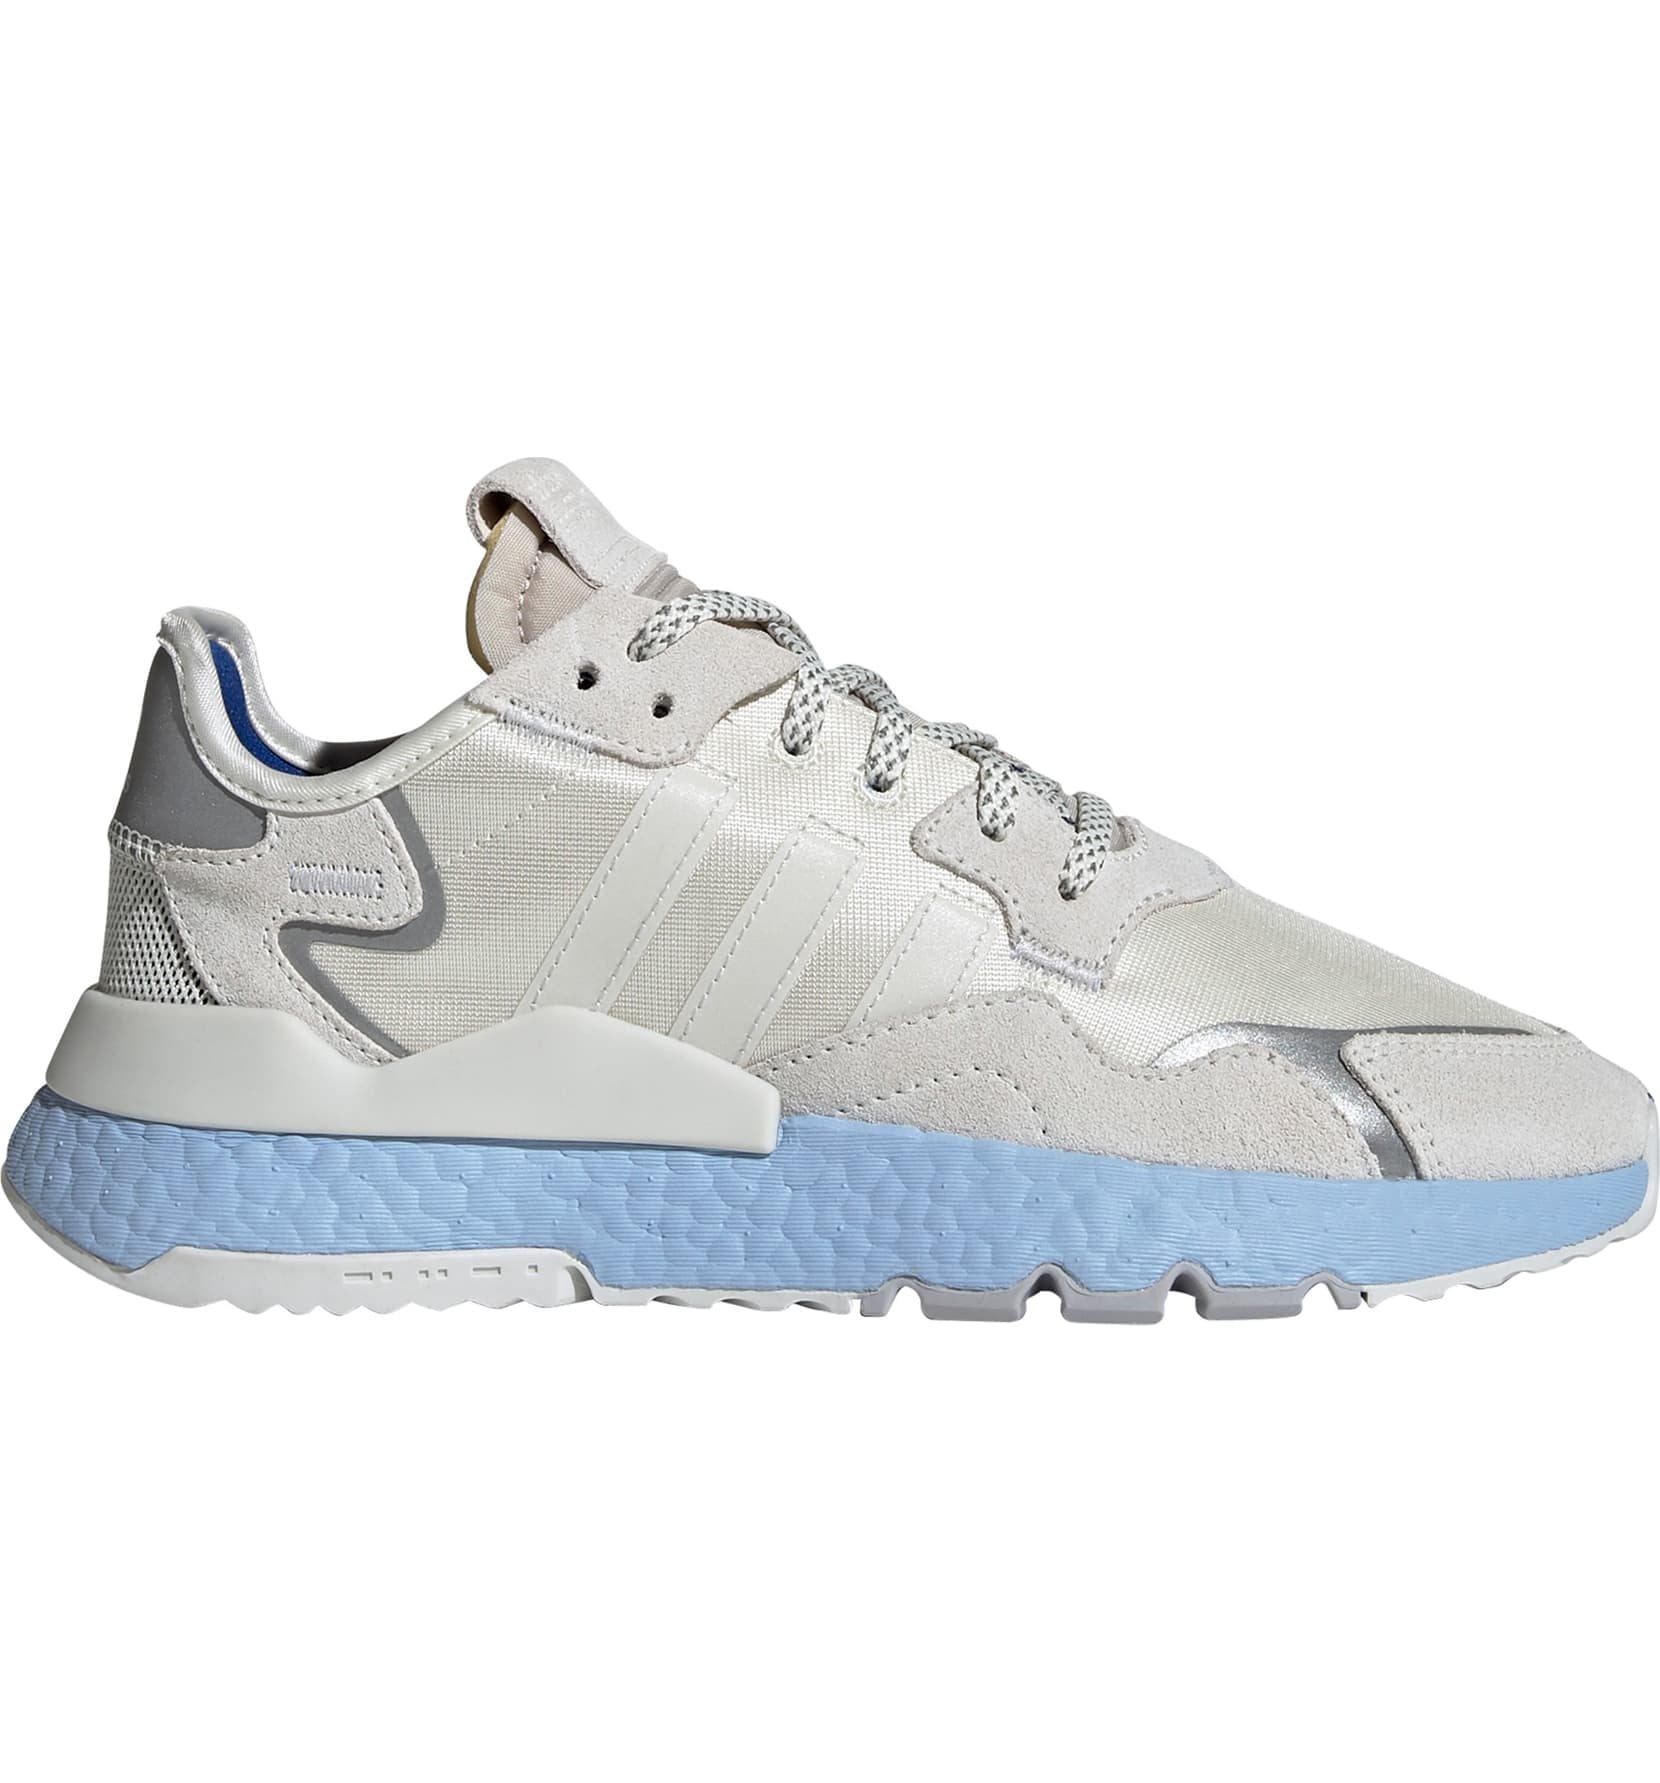 adidas Nite Jogger Sneaker | I Want to 